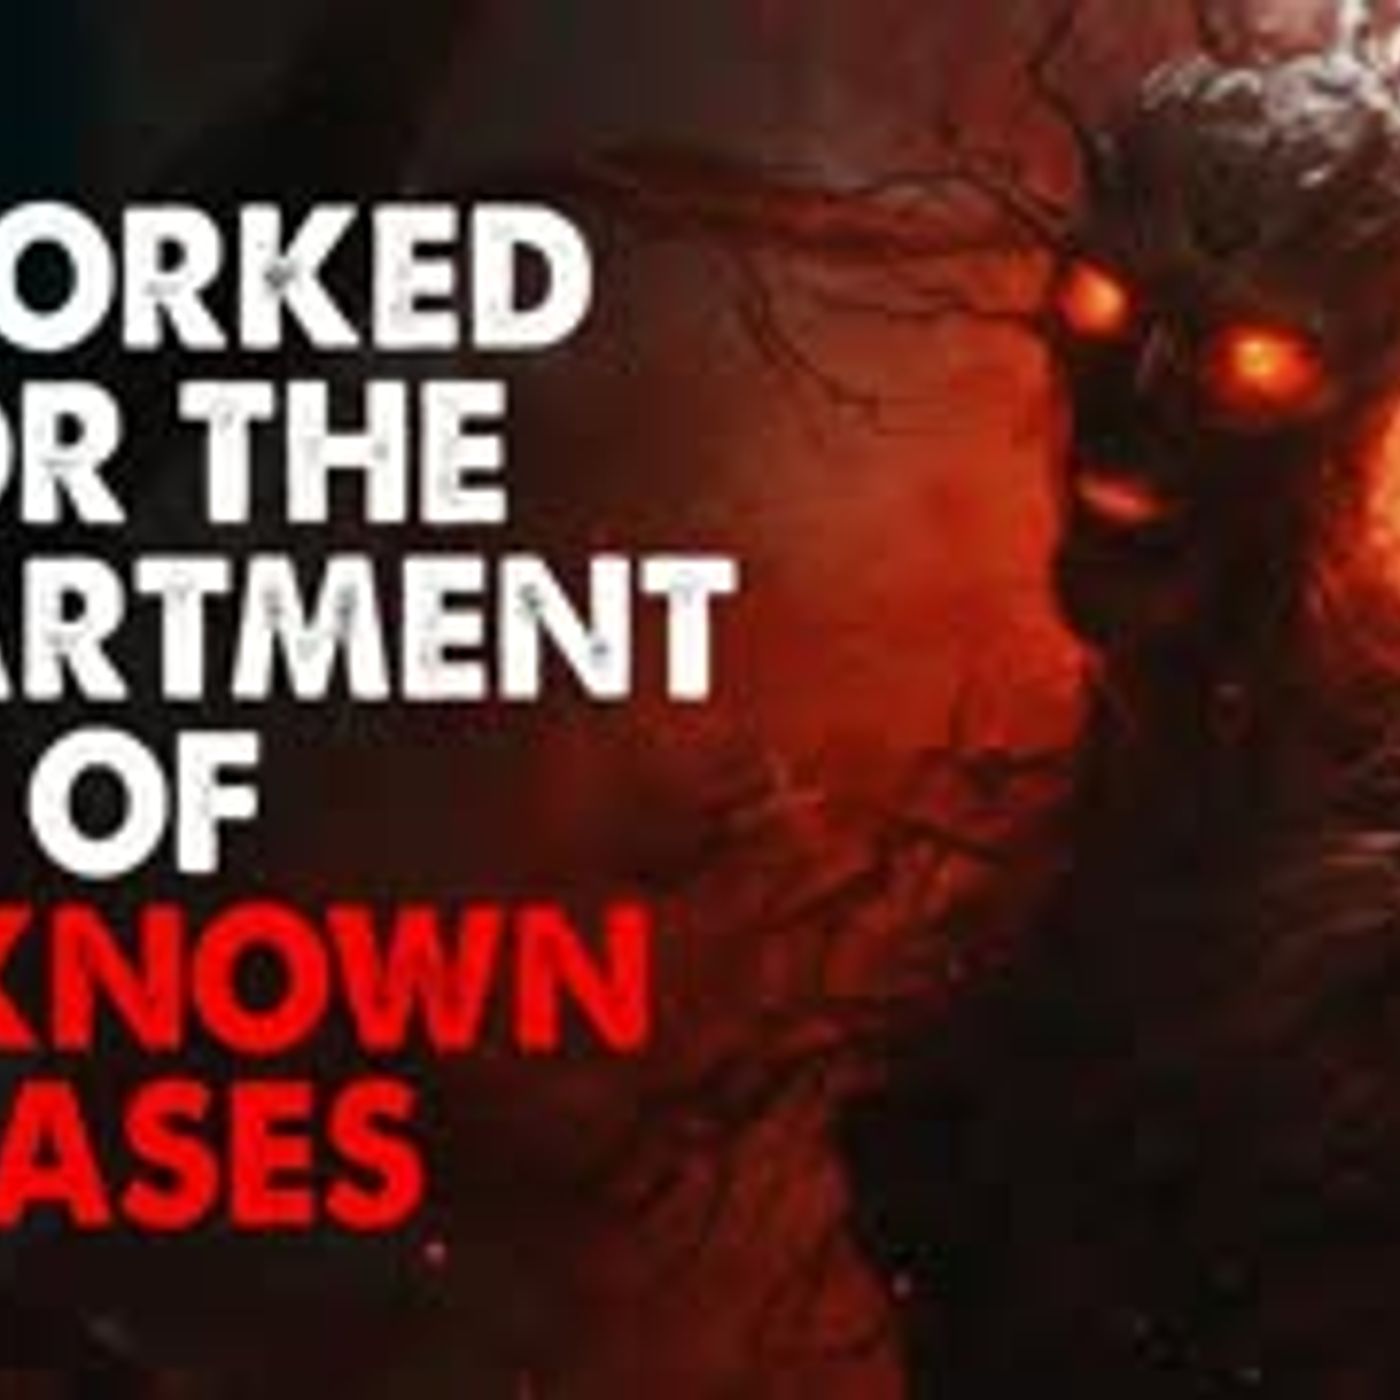 ”I worked for the Department of Unknown Cases” Creepypasta